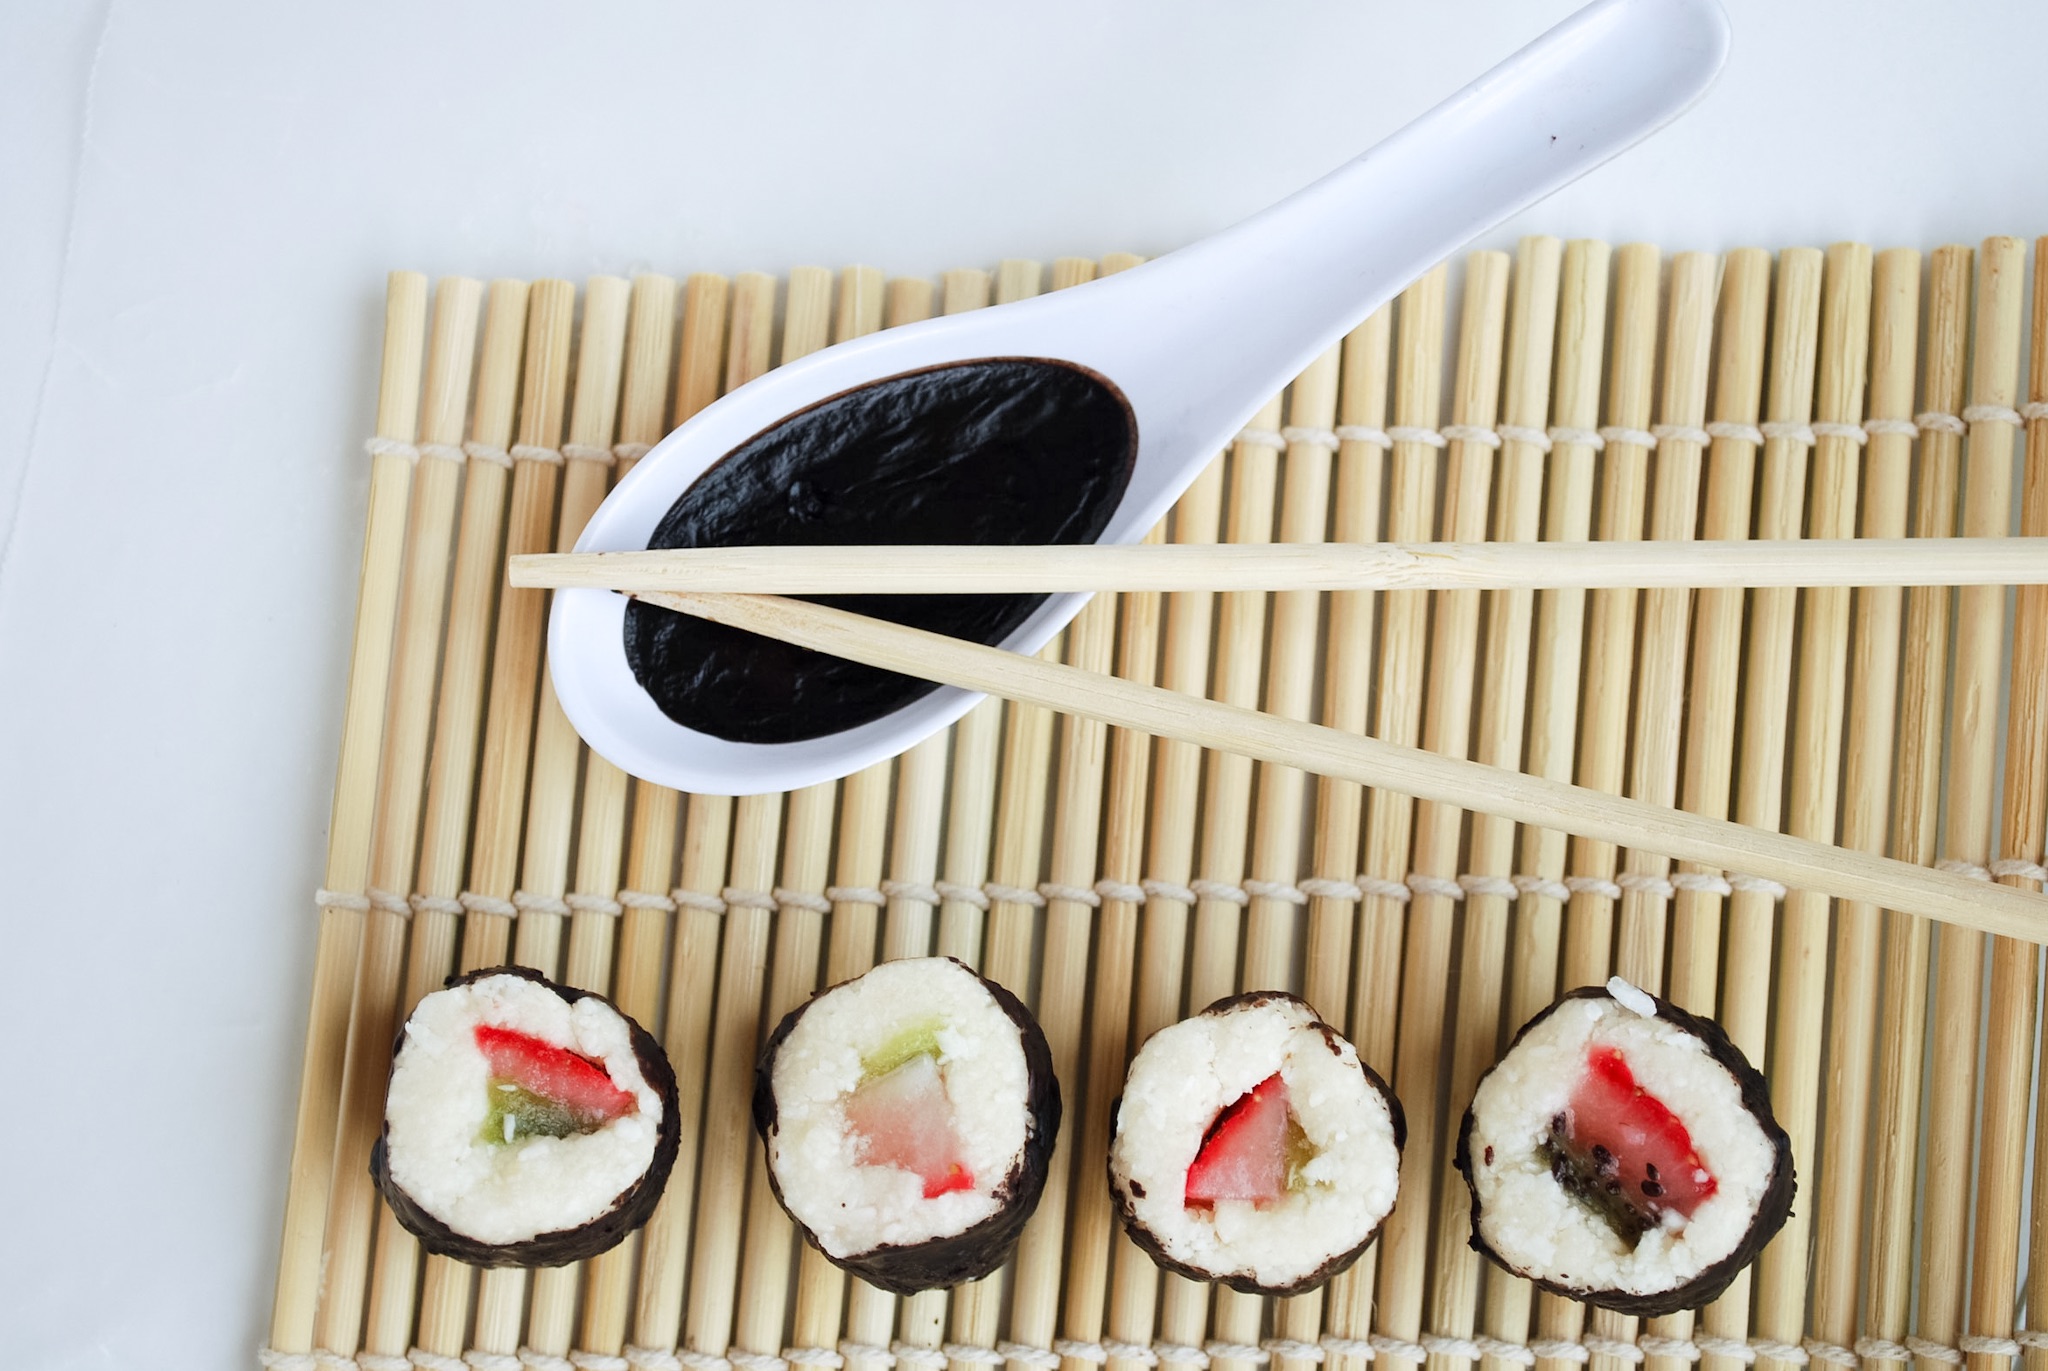 Dessert Sushi: A whimsical grain free and gluten free dessert that is sure to impress! Made with good-for-you whole food ingredients, this dessert is a healthy take on the classic sushi roll! || fooduzzi.com